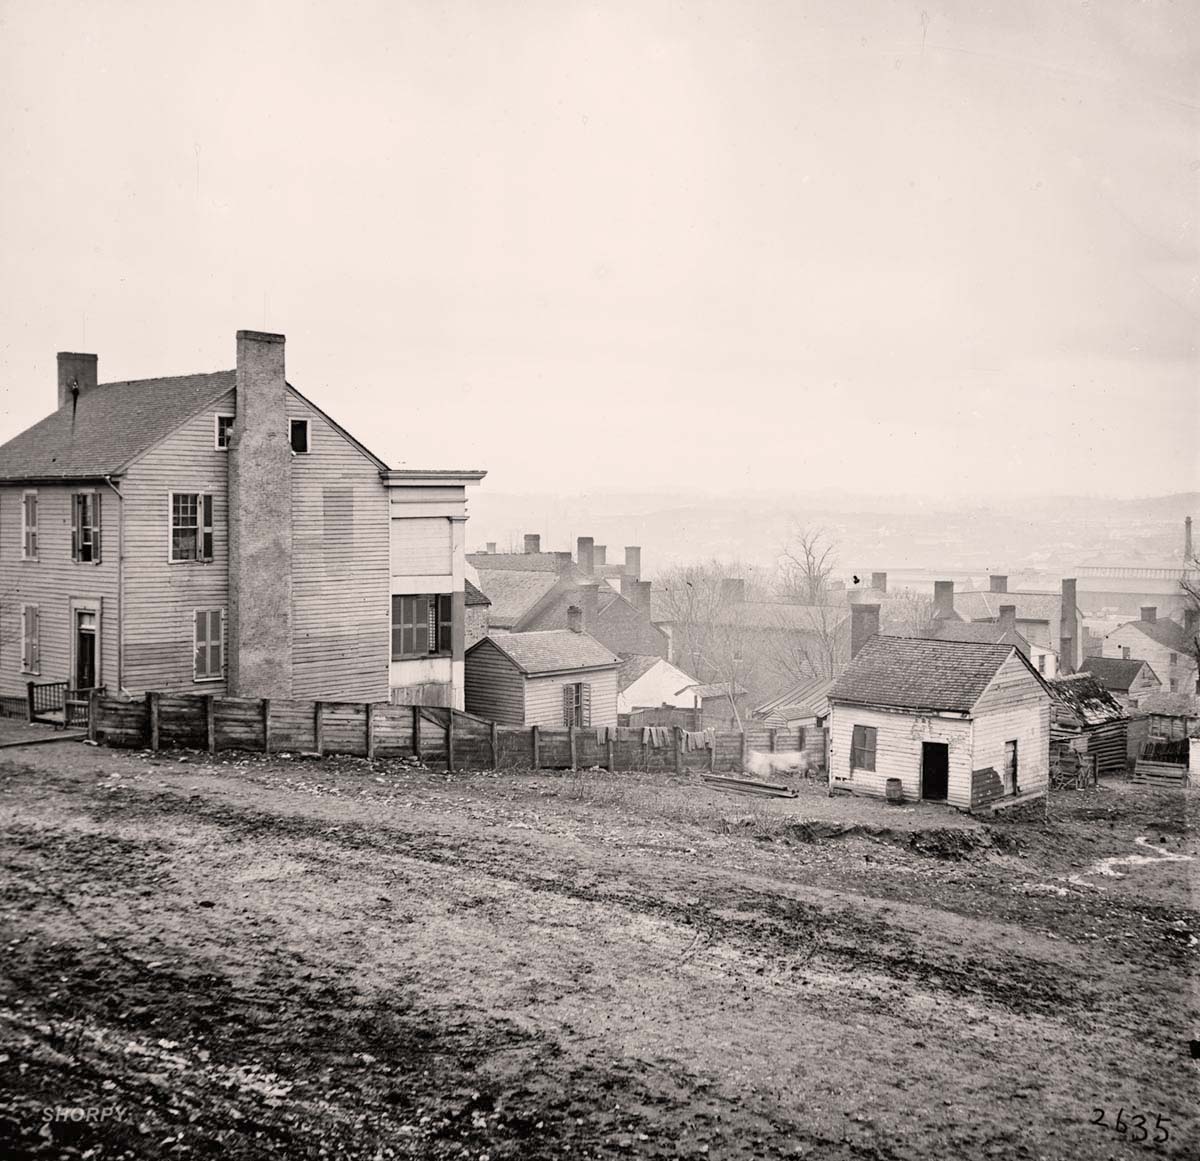 Nashville, Tennessee. View to residential buildings in first day of the fight, December 15, 1864